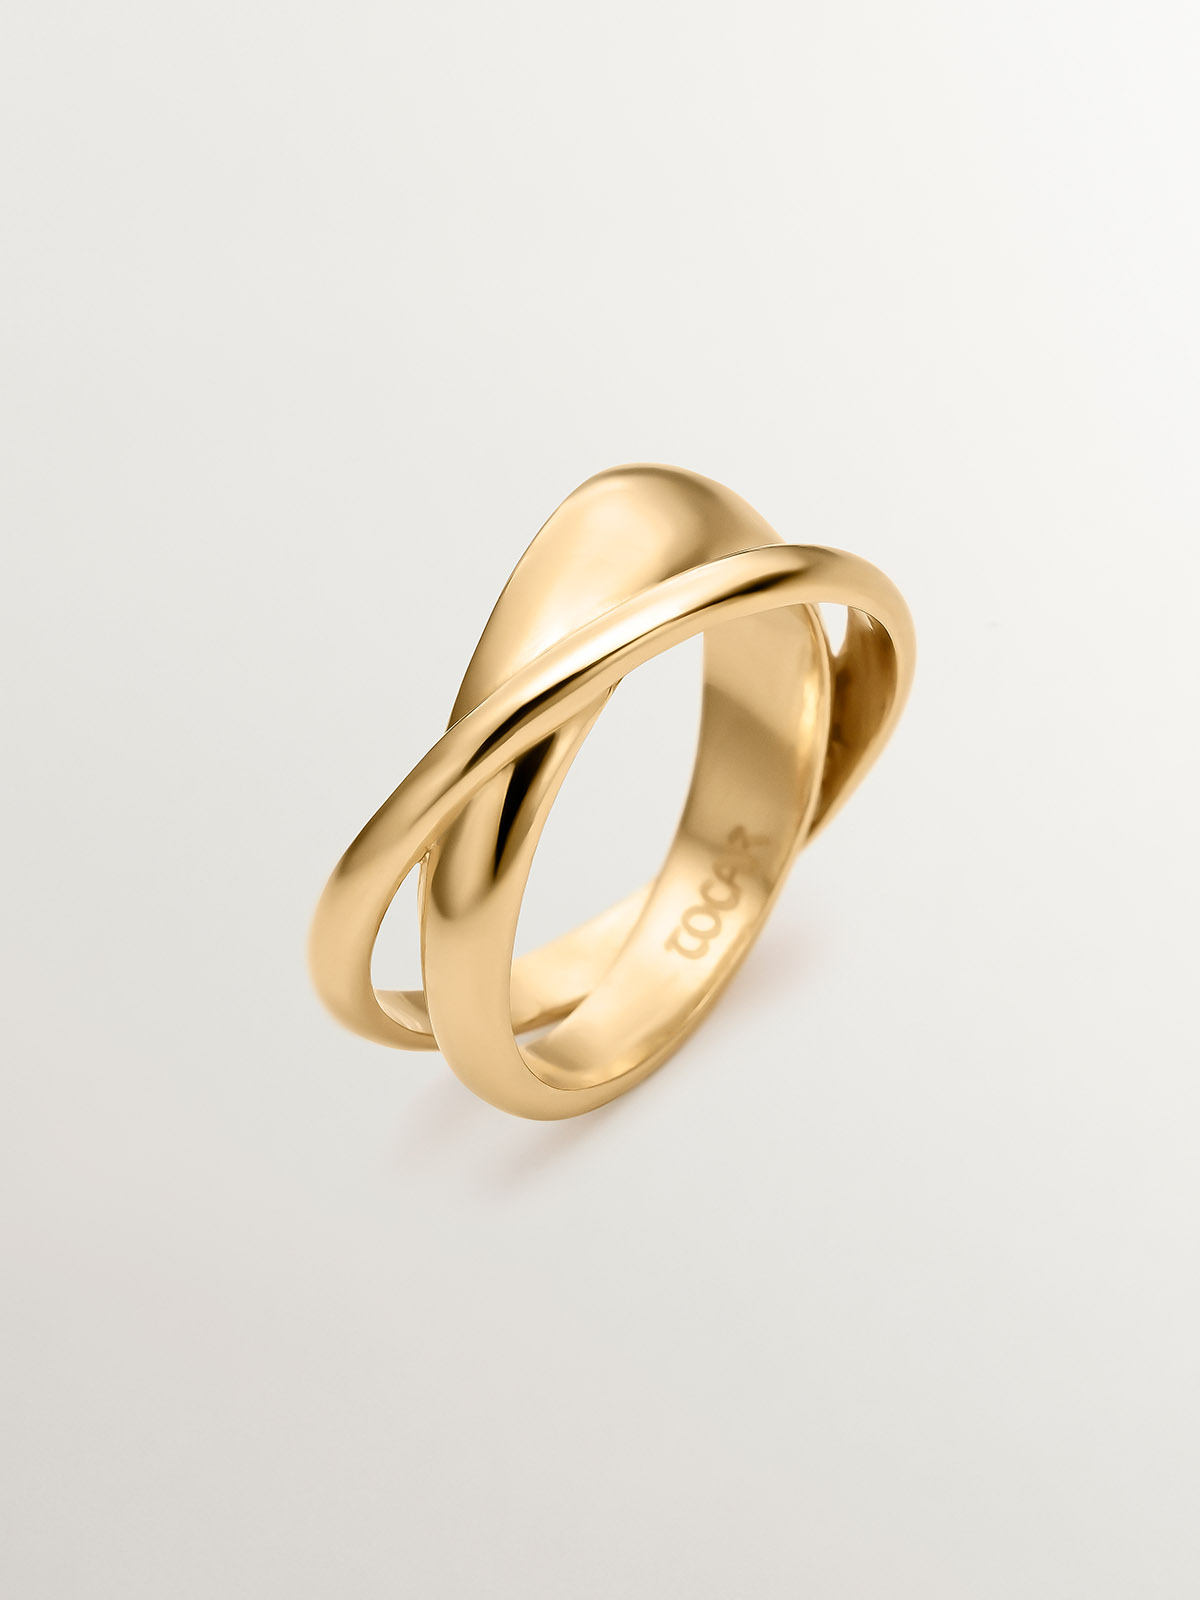 Double cross 925 silver ring bathed in 18K yellow gold.